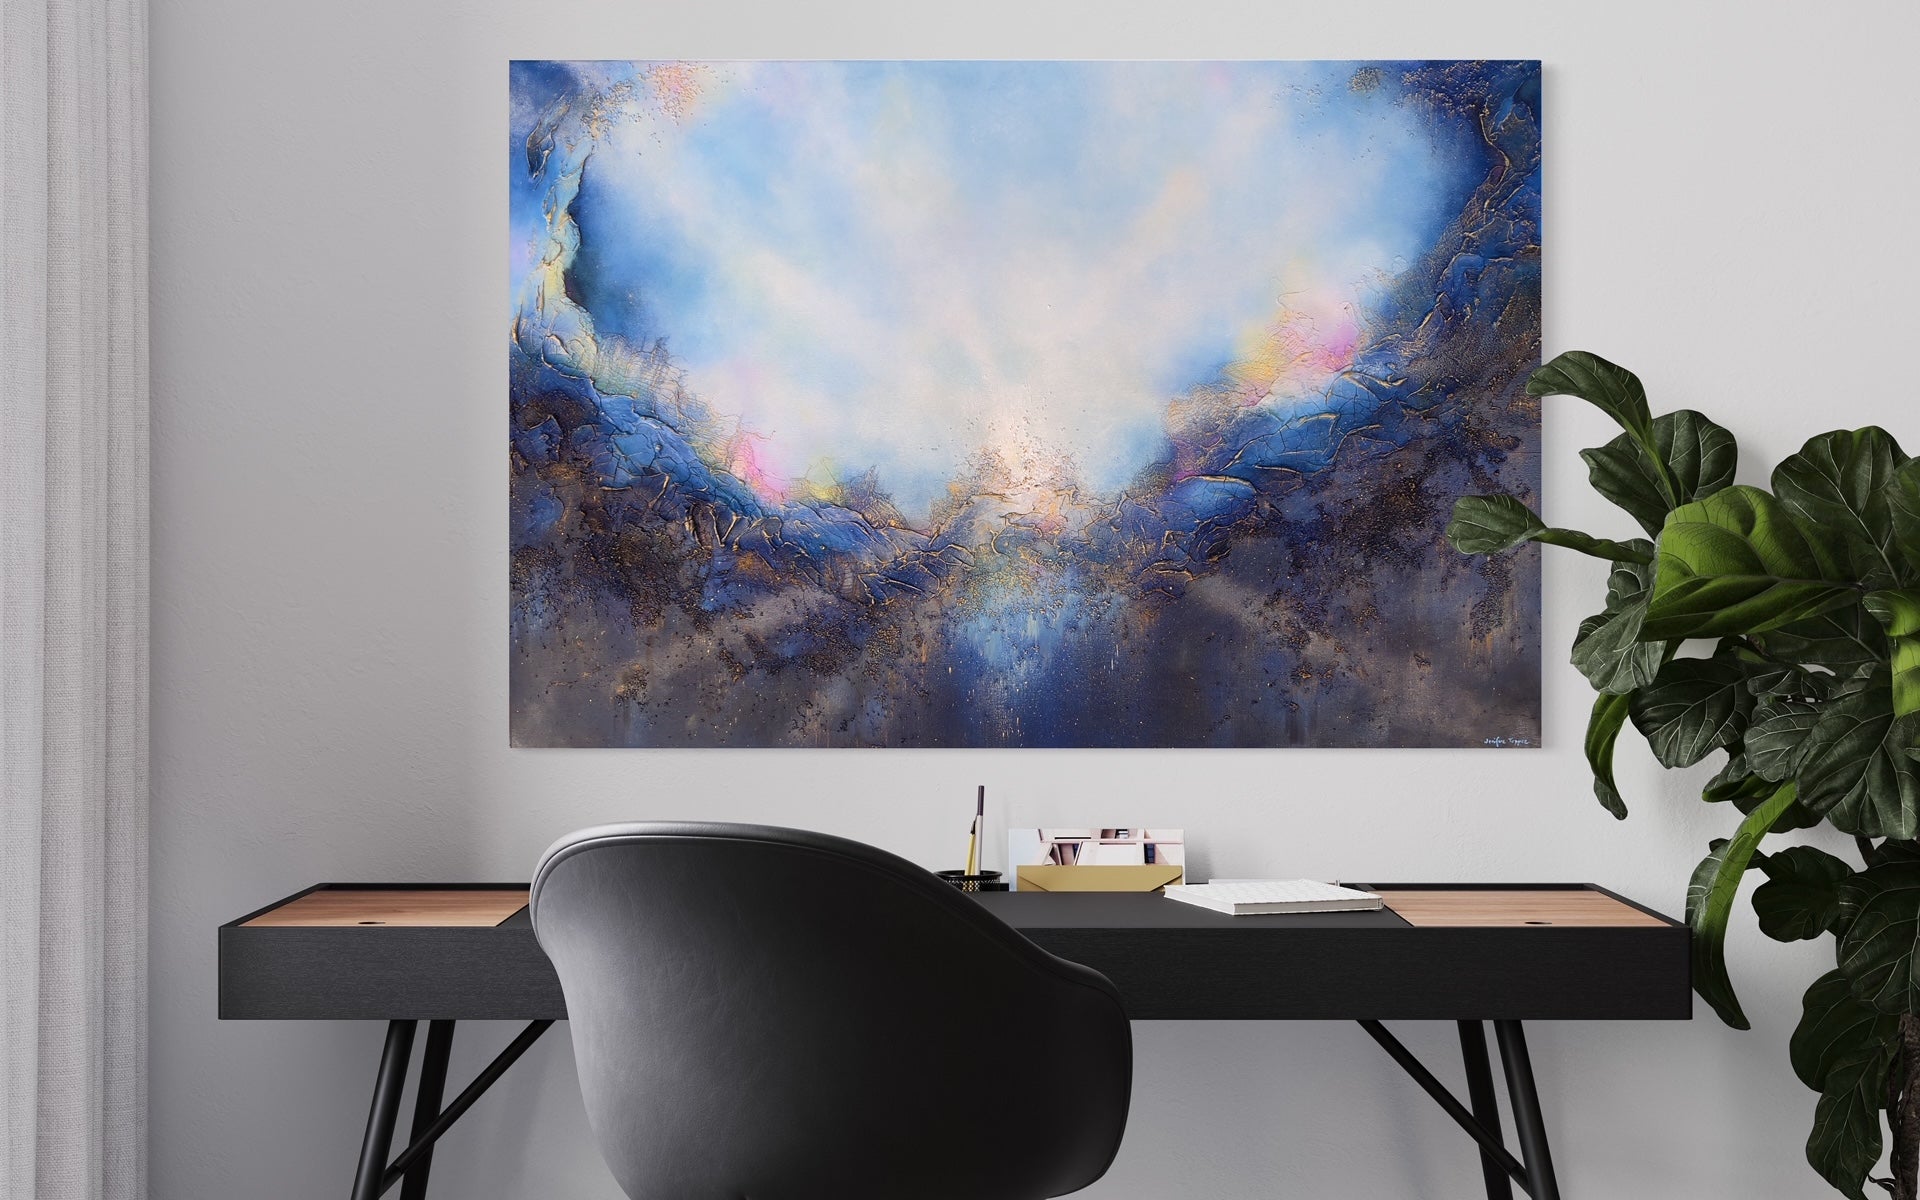 Soul's Return, hanging over a desk with modern chair and deep green plants. a textured painting with light rays shining out from the center representing the soul's return to one's self, or the universe. Blue, pink, white, dark blue, textured painting. Ephemeral art, art with meaning, soul artist. Jennifer Tepper Fine Art.